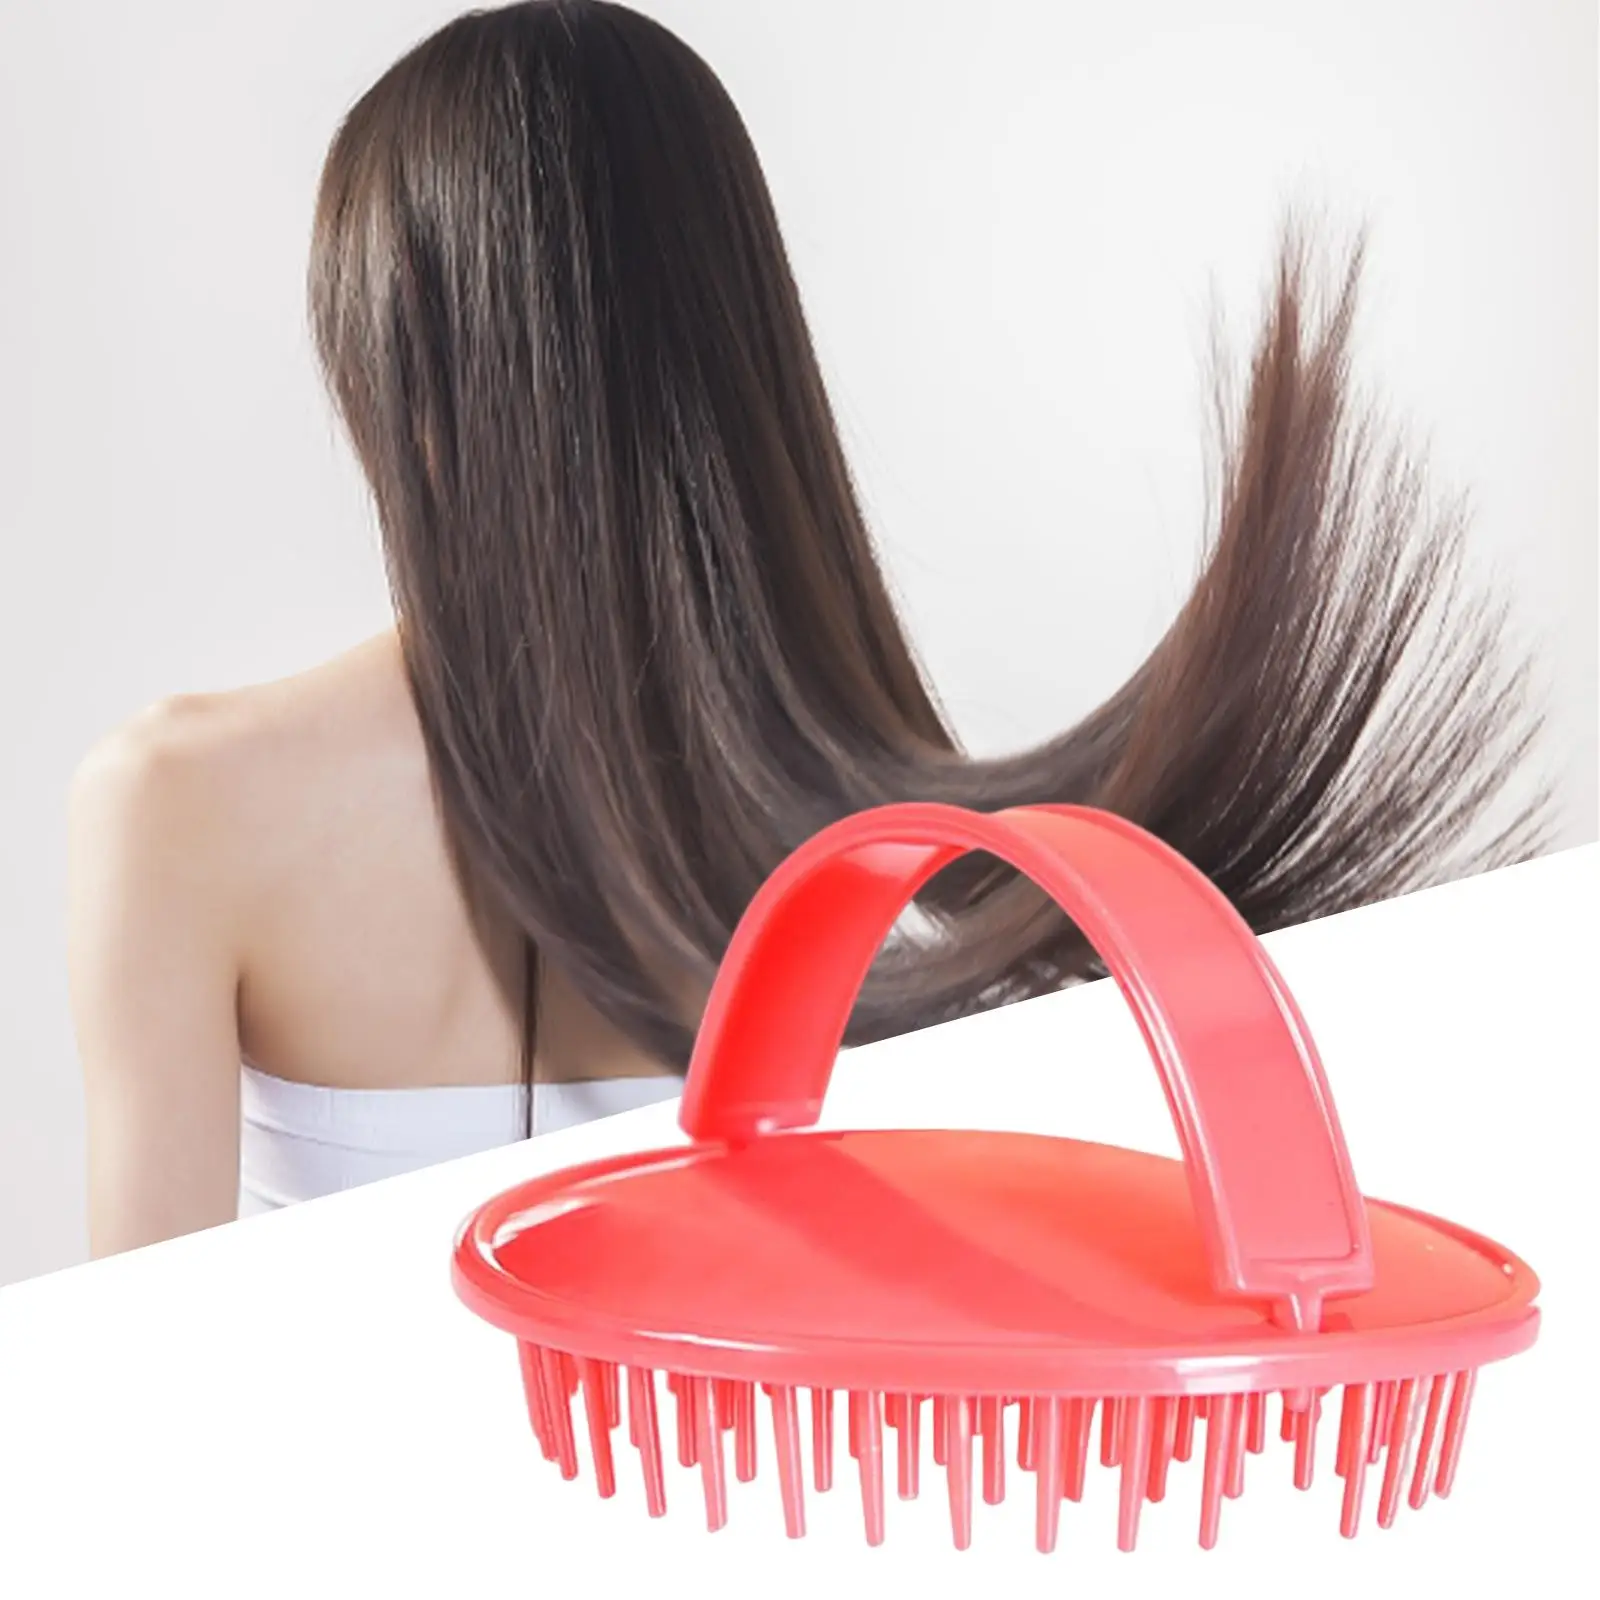 Scalp Massager Shampoo Brush Wear Resistant for Men Women Itching Removal Promote Hair Growth